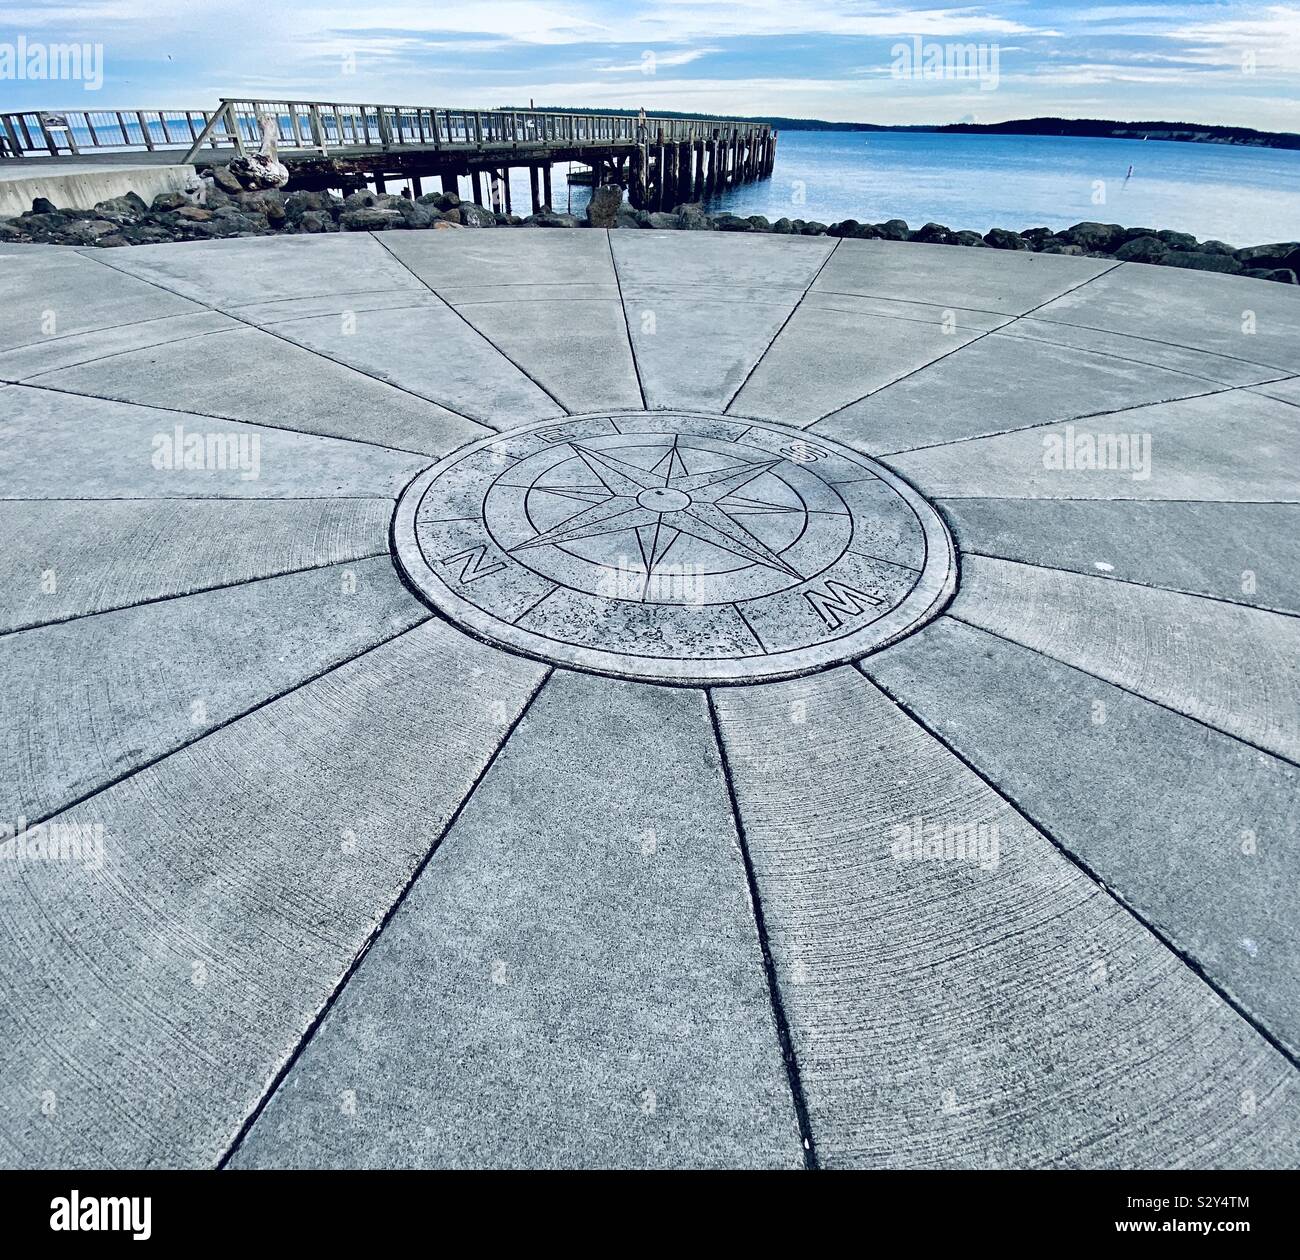 Compass rose at the waterfront in Port Townsend, Washington state, USA Stock Photo